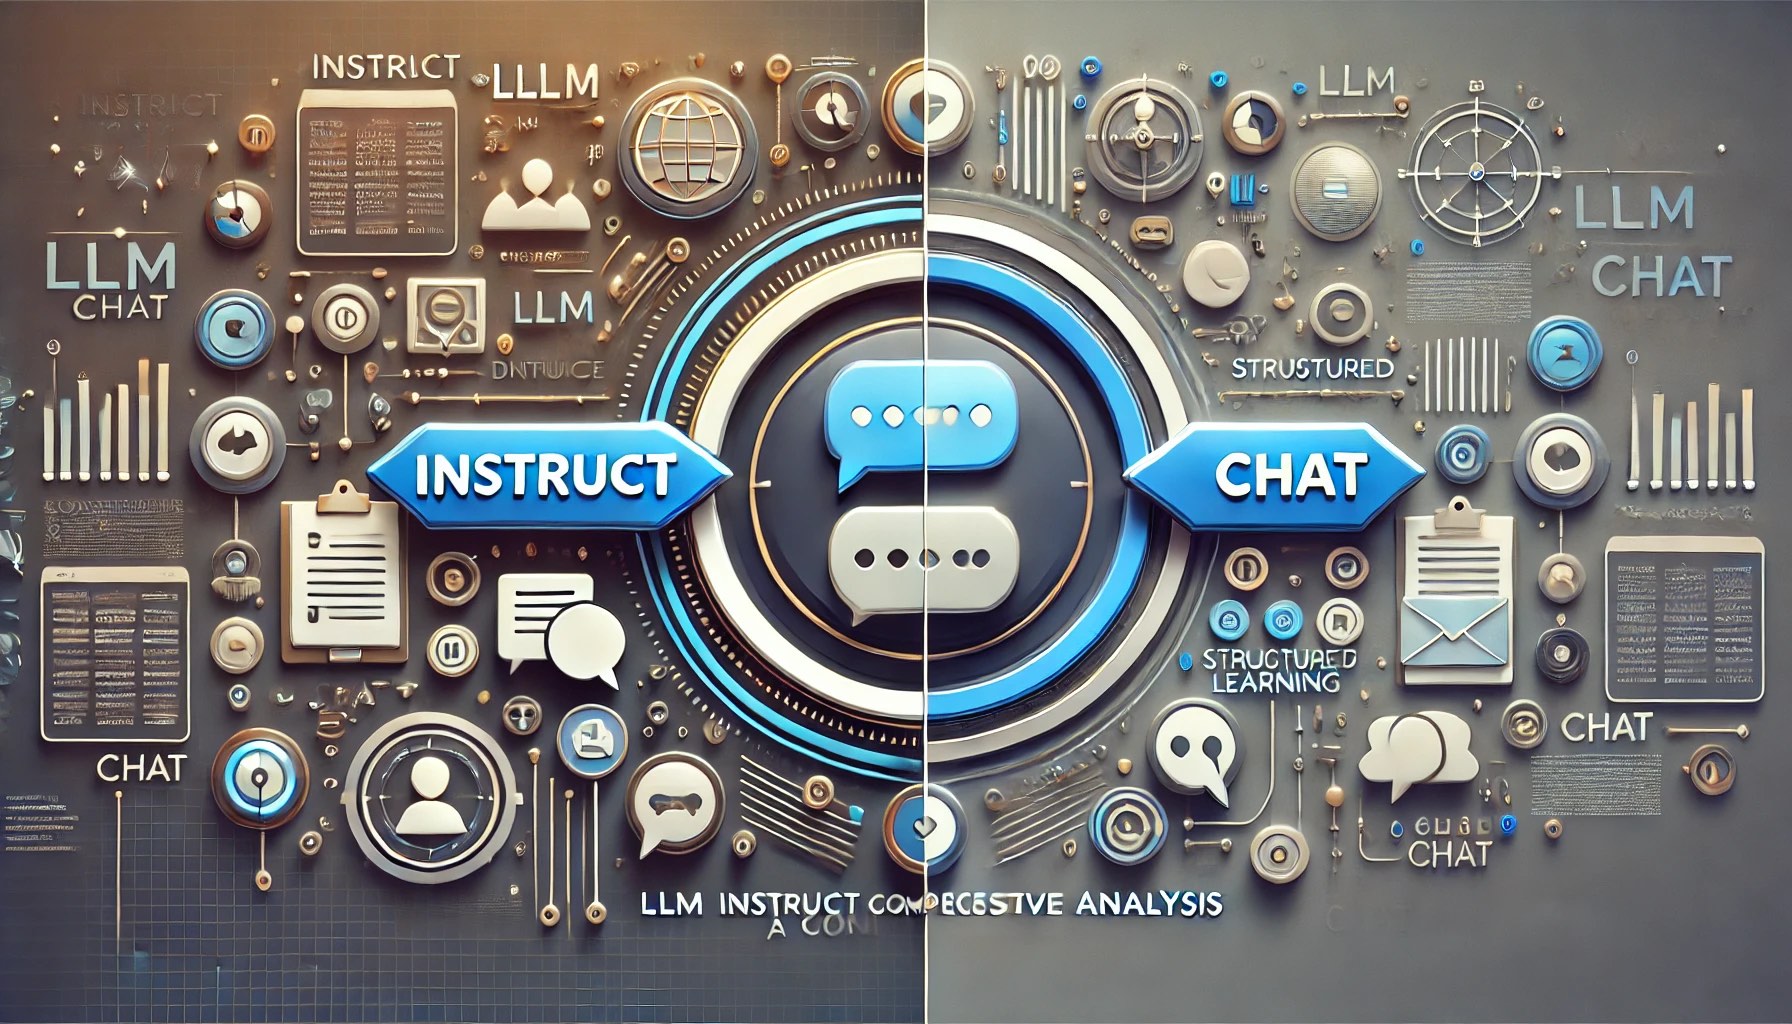 LLM Instruct vs Chat - A Comprehensive Analysis